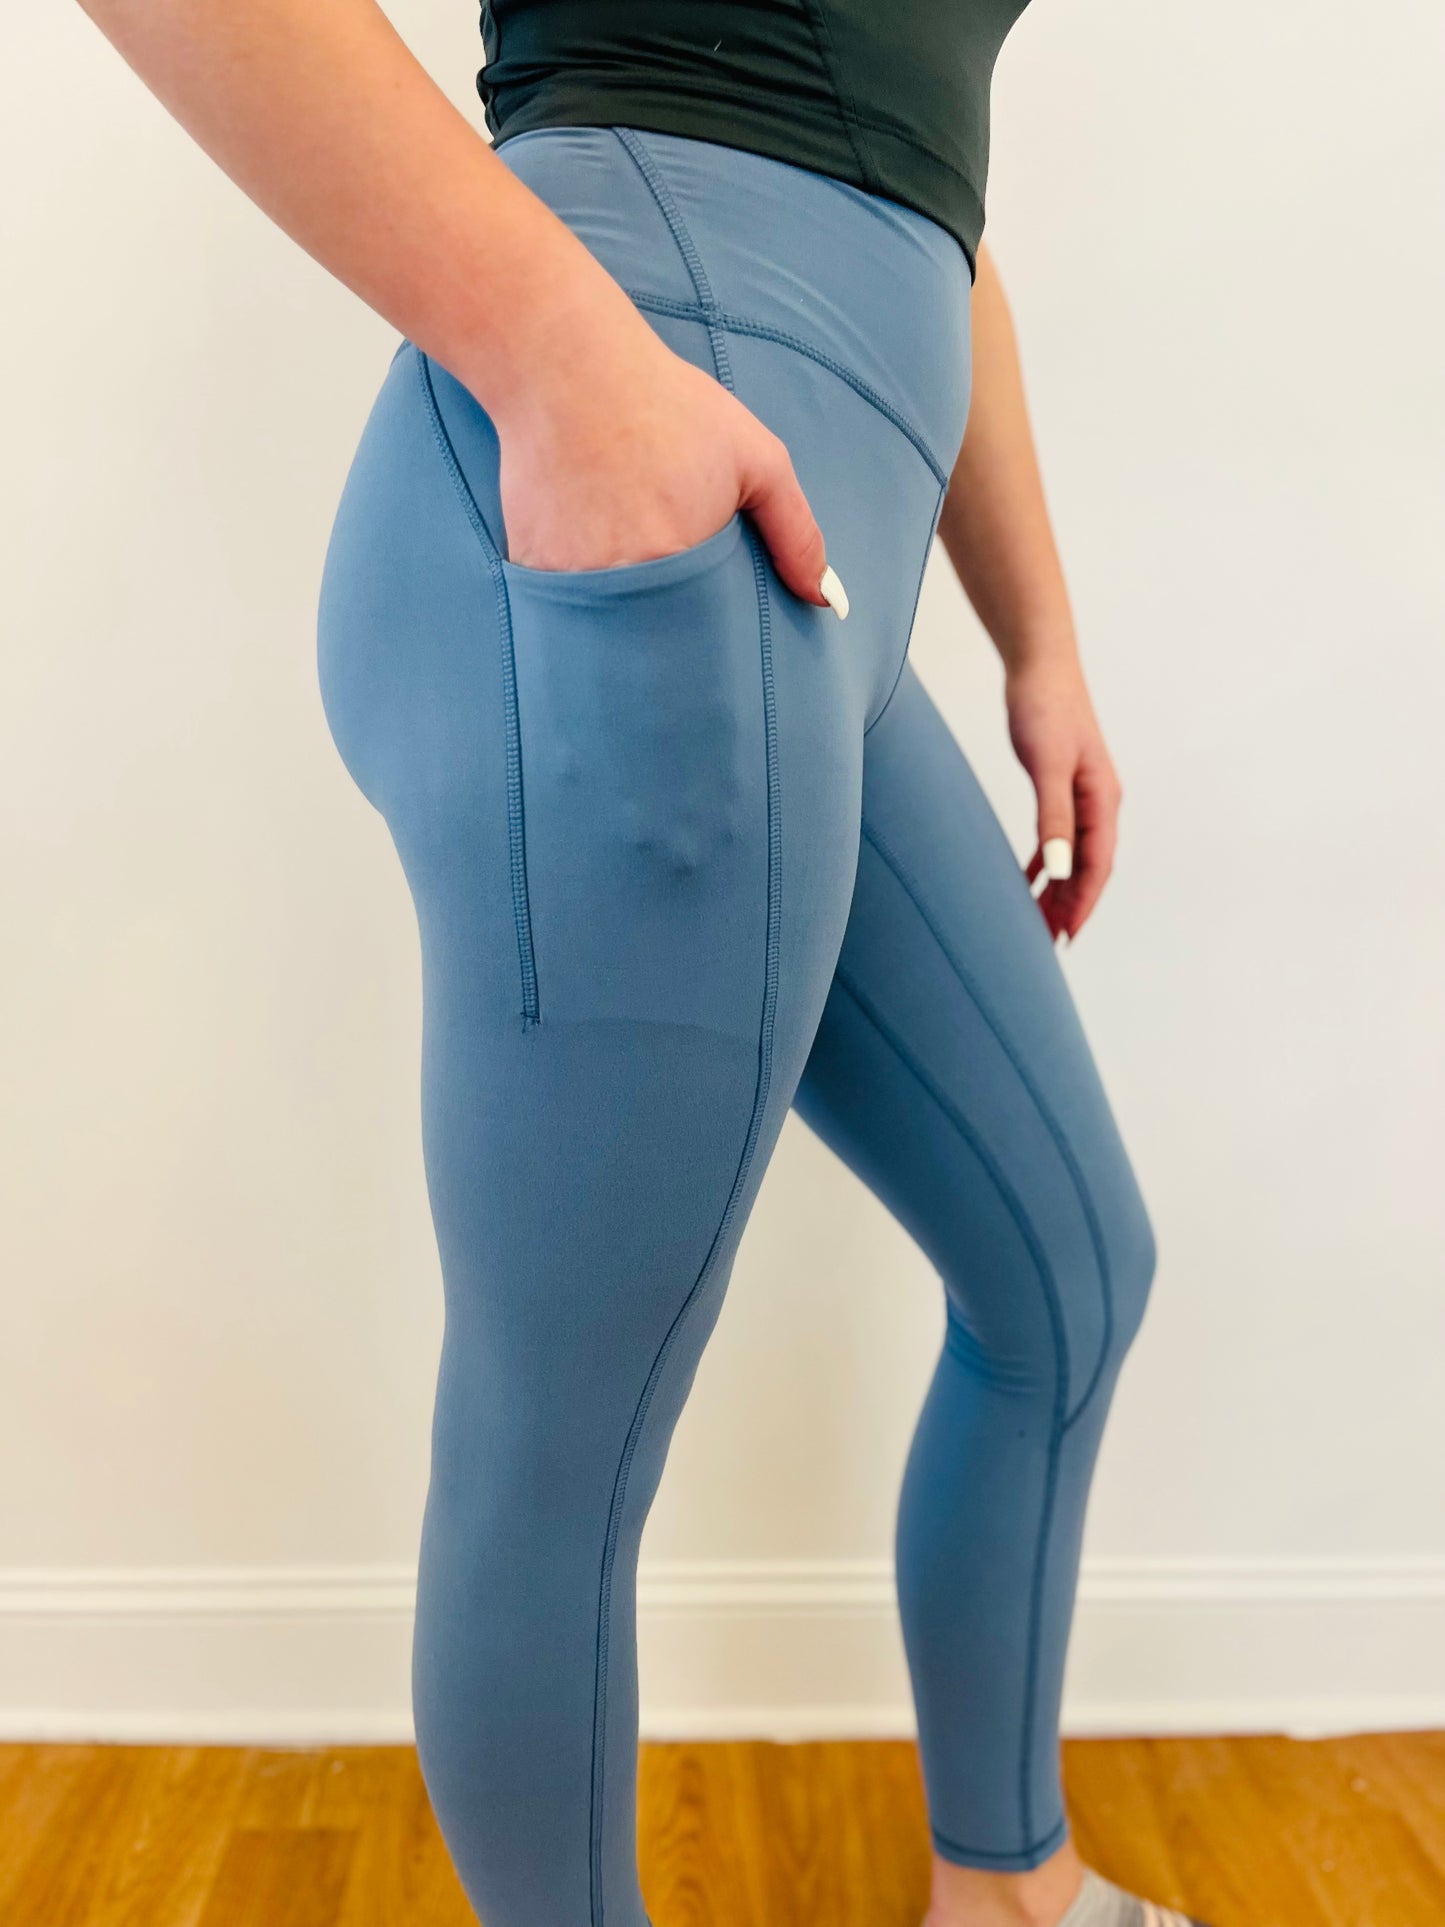 BUTTER YOGA PANTS WITH SIDE POCKETS Dusty Blue